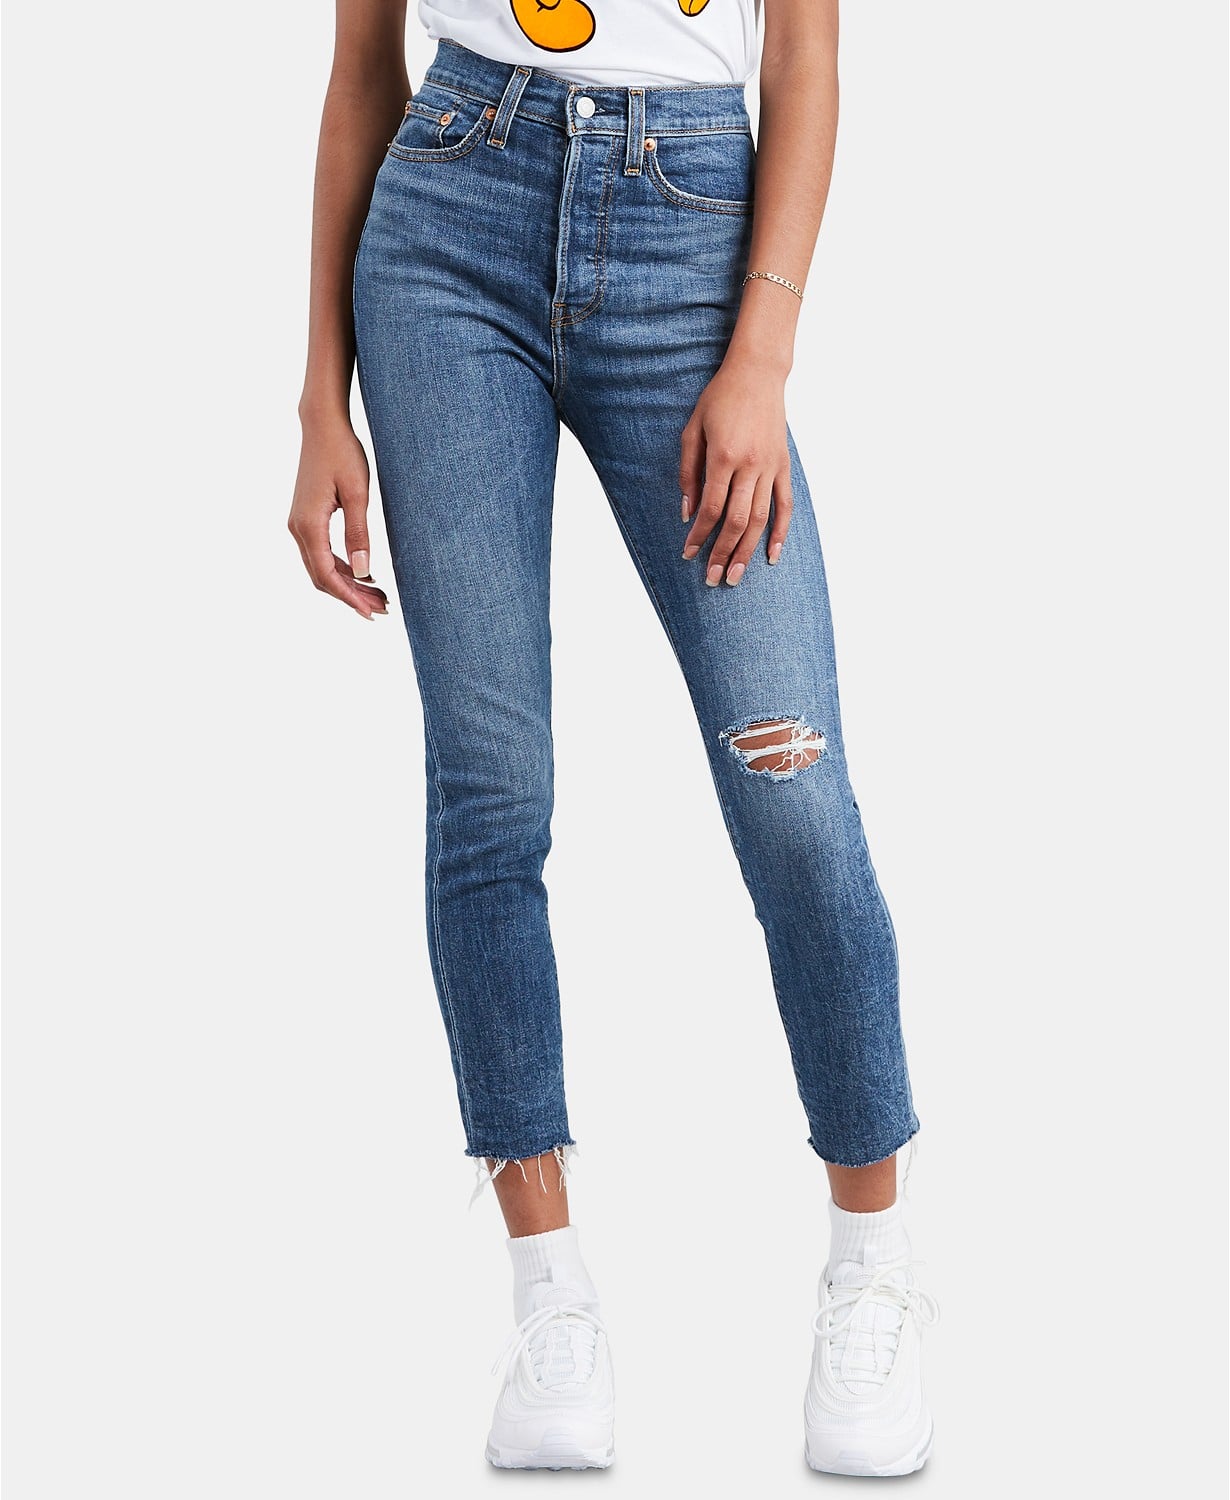 Levi's Ripped Skinny Wedgie Jeans | 50 Fall Fashion Finds That'll Elevate  Your Wardrobe, All Under $50 | POPSUGAR Fashion Photo 22